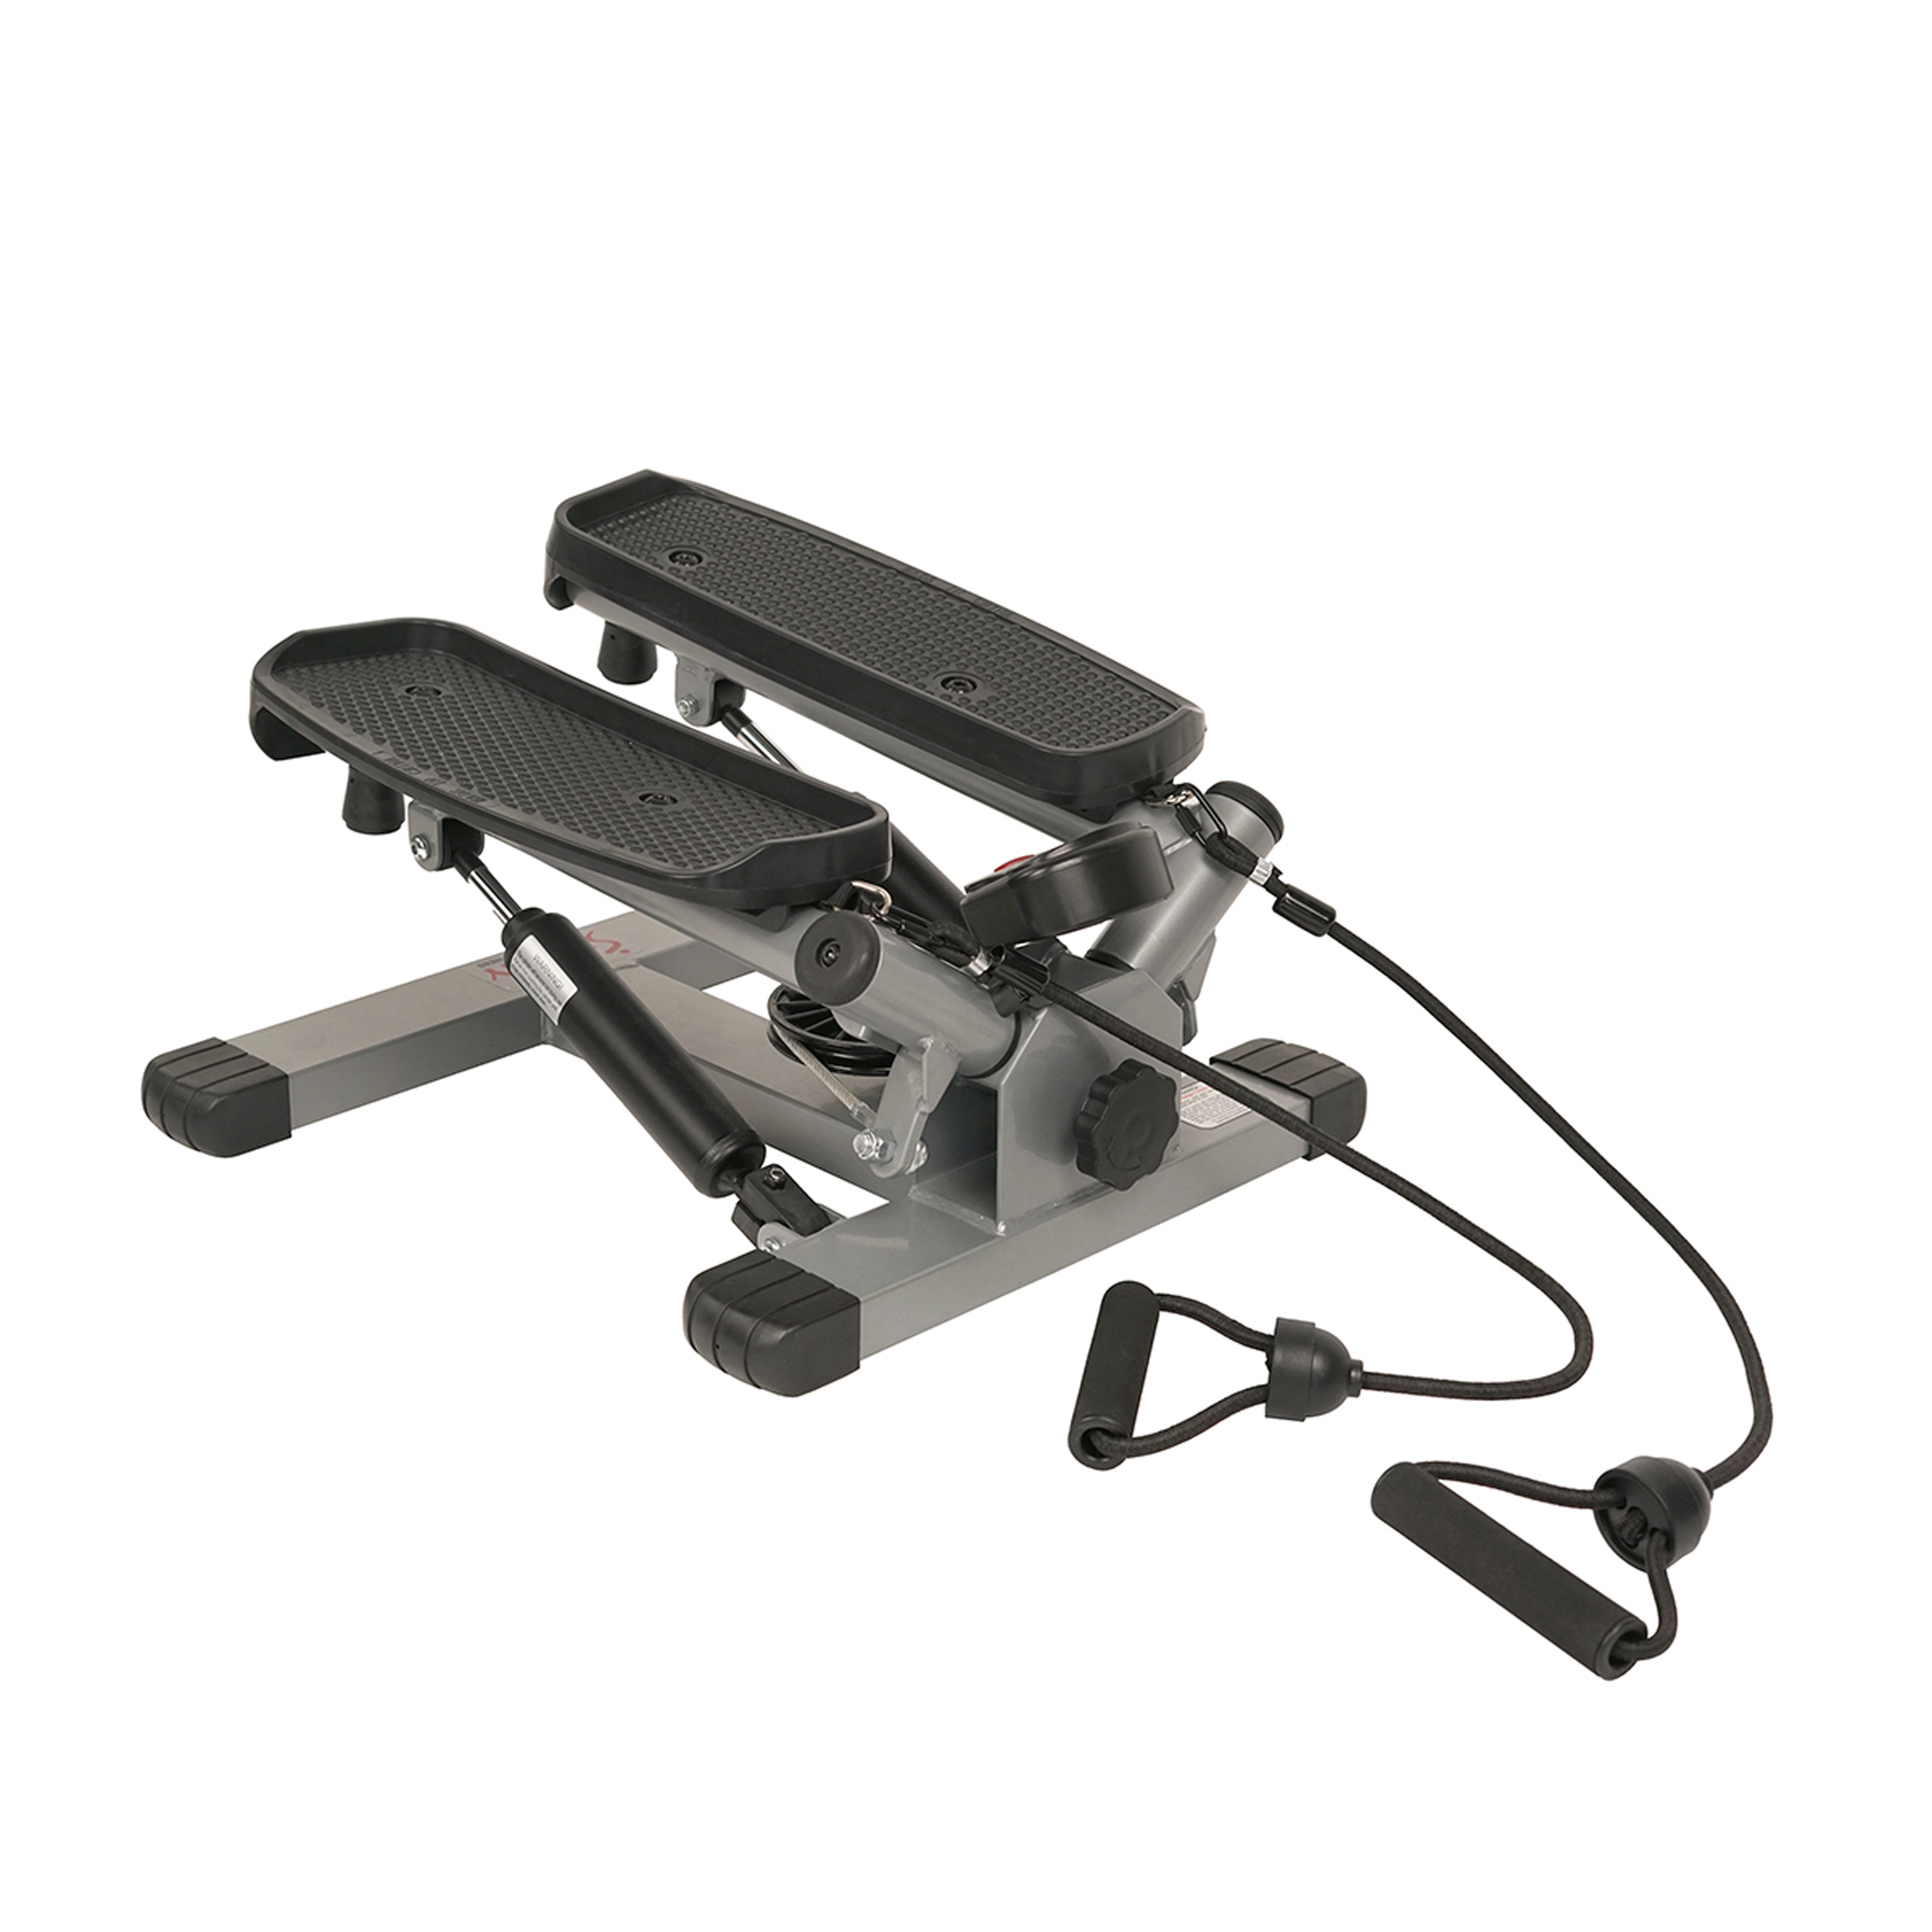 Sunny Health & Fitness Twist Stair Stepper Machine with Resistance Bands with Adjustable Height, NO. 045 - image 3 of 11